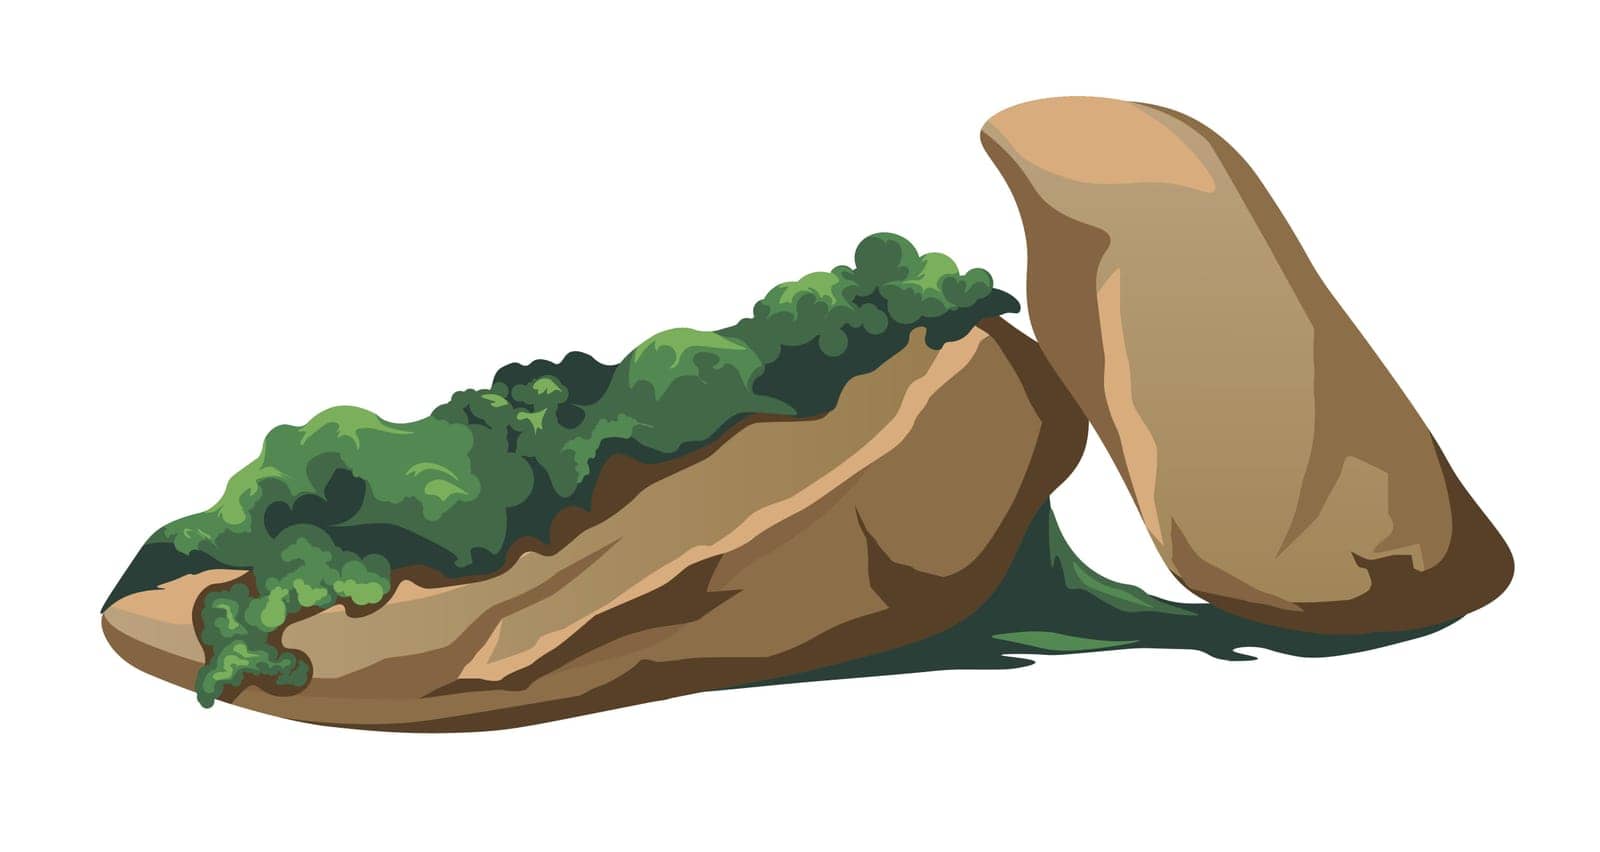 Stones grown with moss, forest or woods vegetation and design. Nature and wilderness, massive rocks with flowerless plant, biodiversity. Landscape decoration or park scene. Vector in flat style